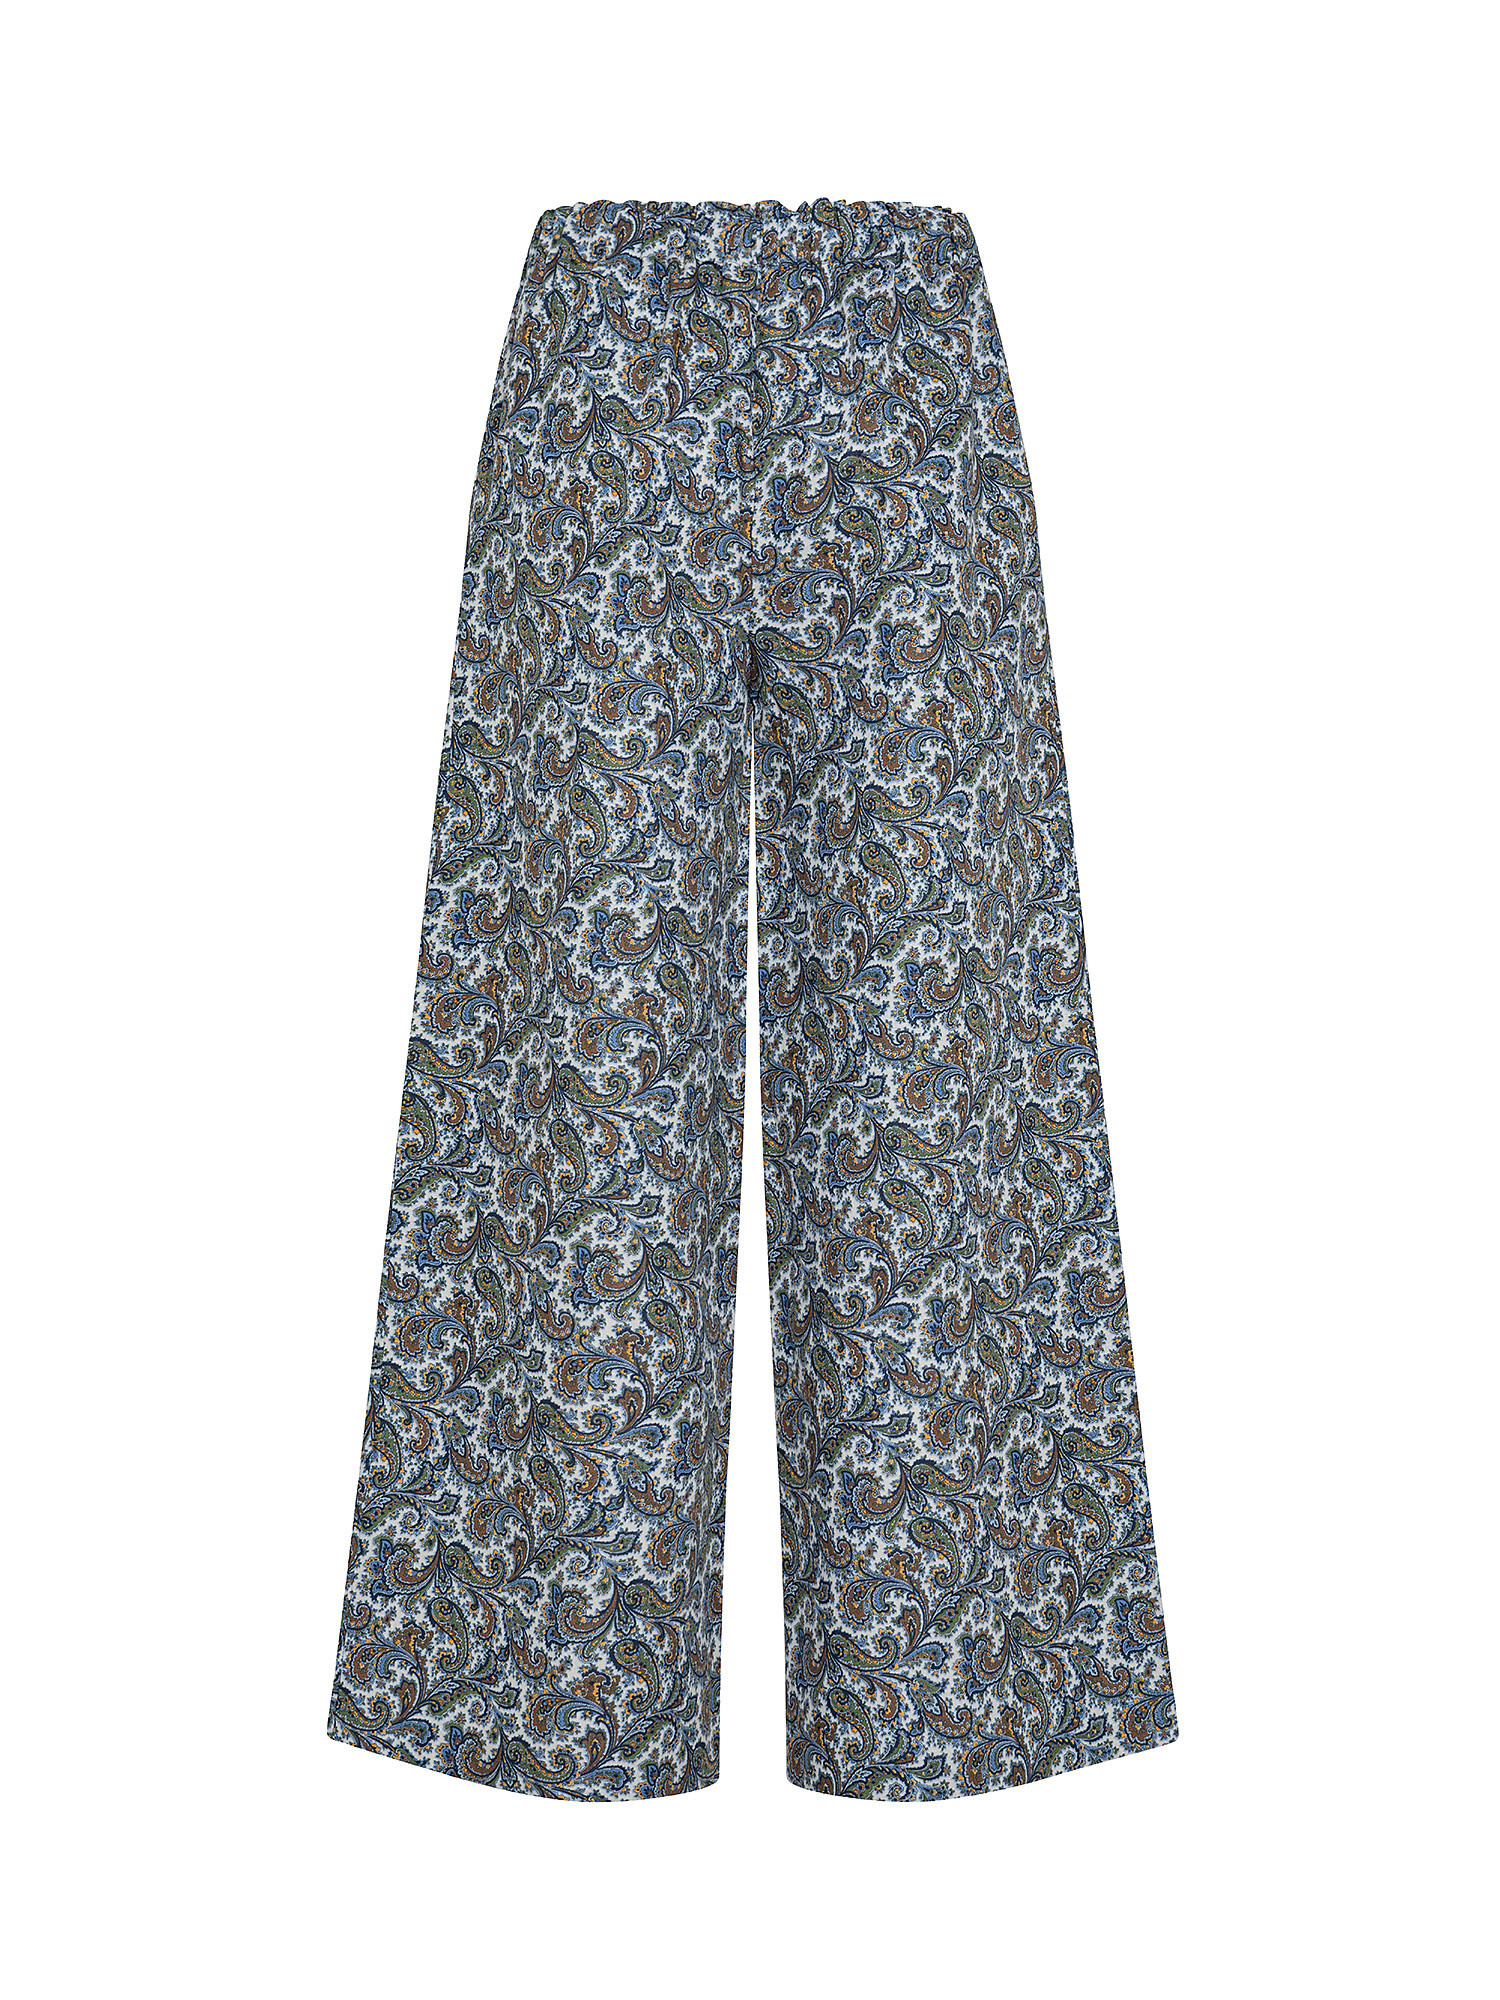 Cashmere patterned trousers, Multicolor, large image number 1